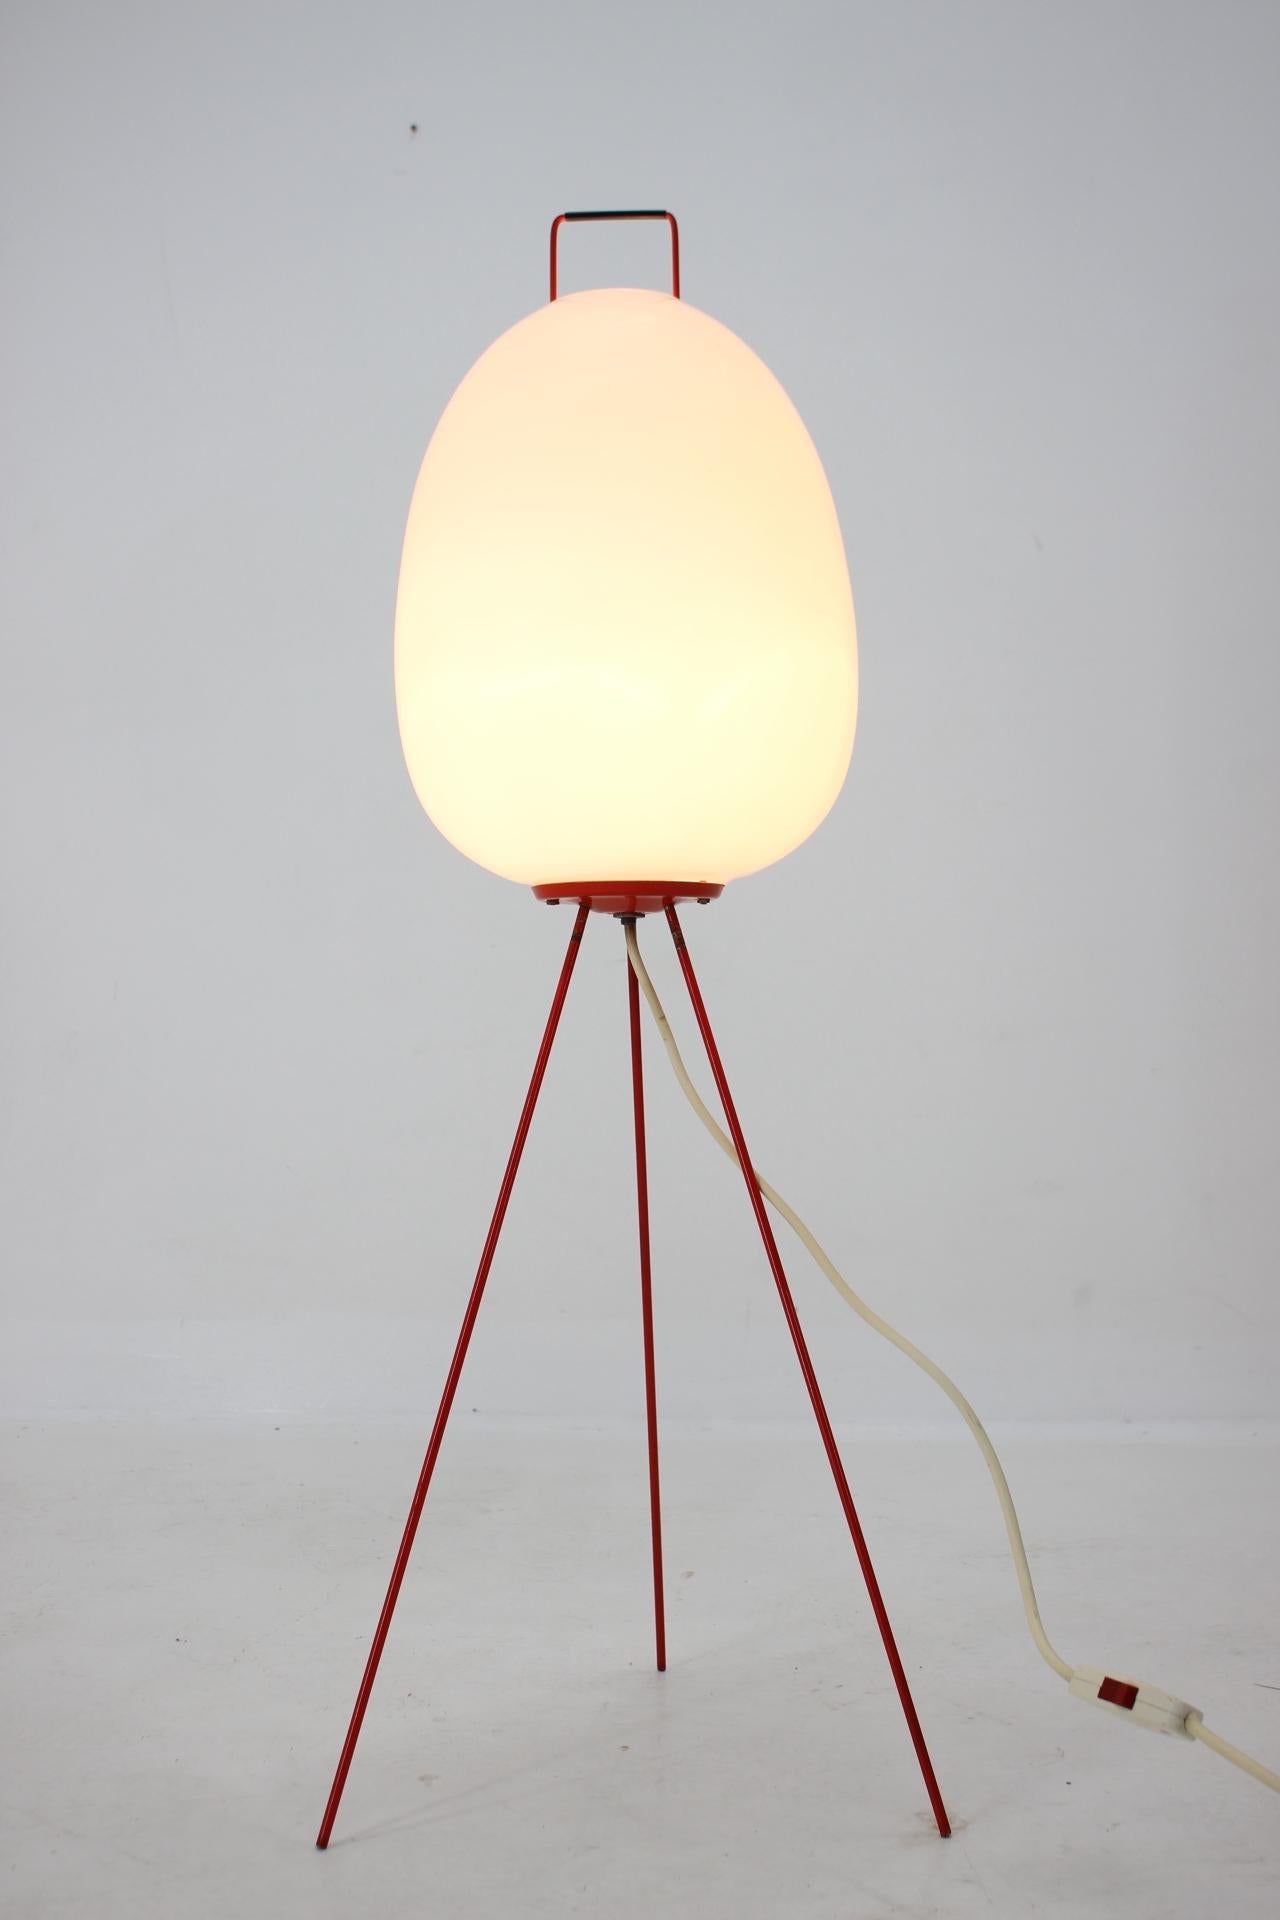 - 1960s, Czechoslovakia
- Designer: J. Hurka
- Maker: Napako (marked)
- Original and perfect condition
- Published in books
- Opaline duplex glass shade.